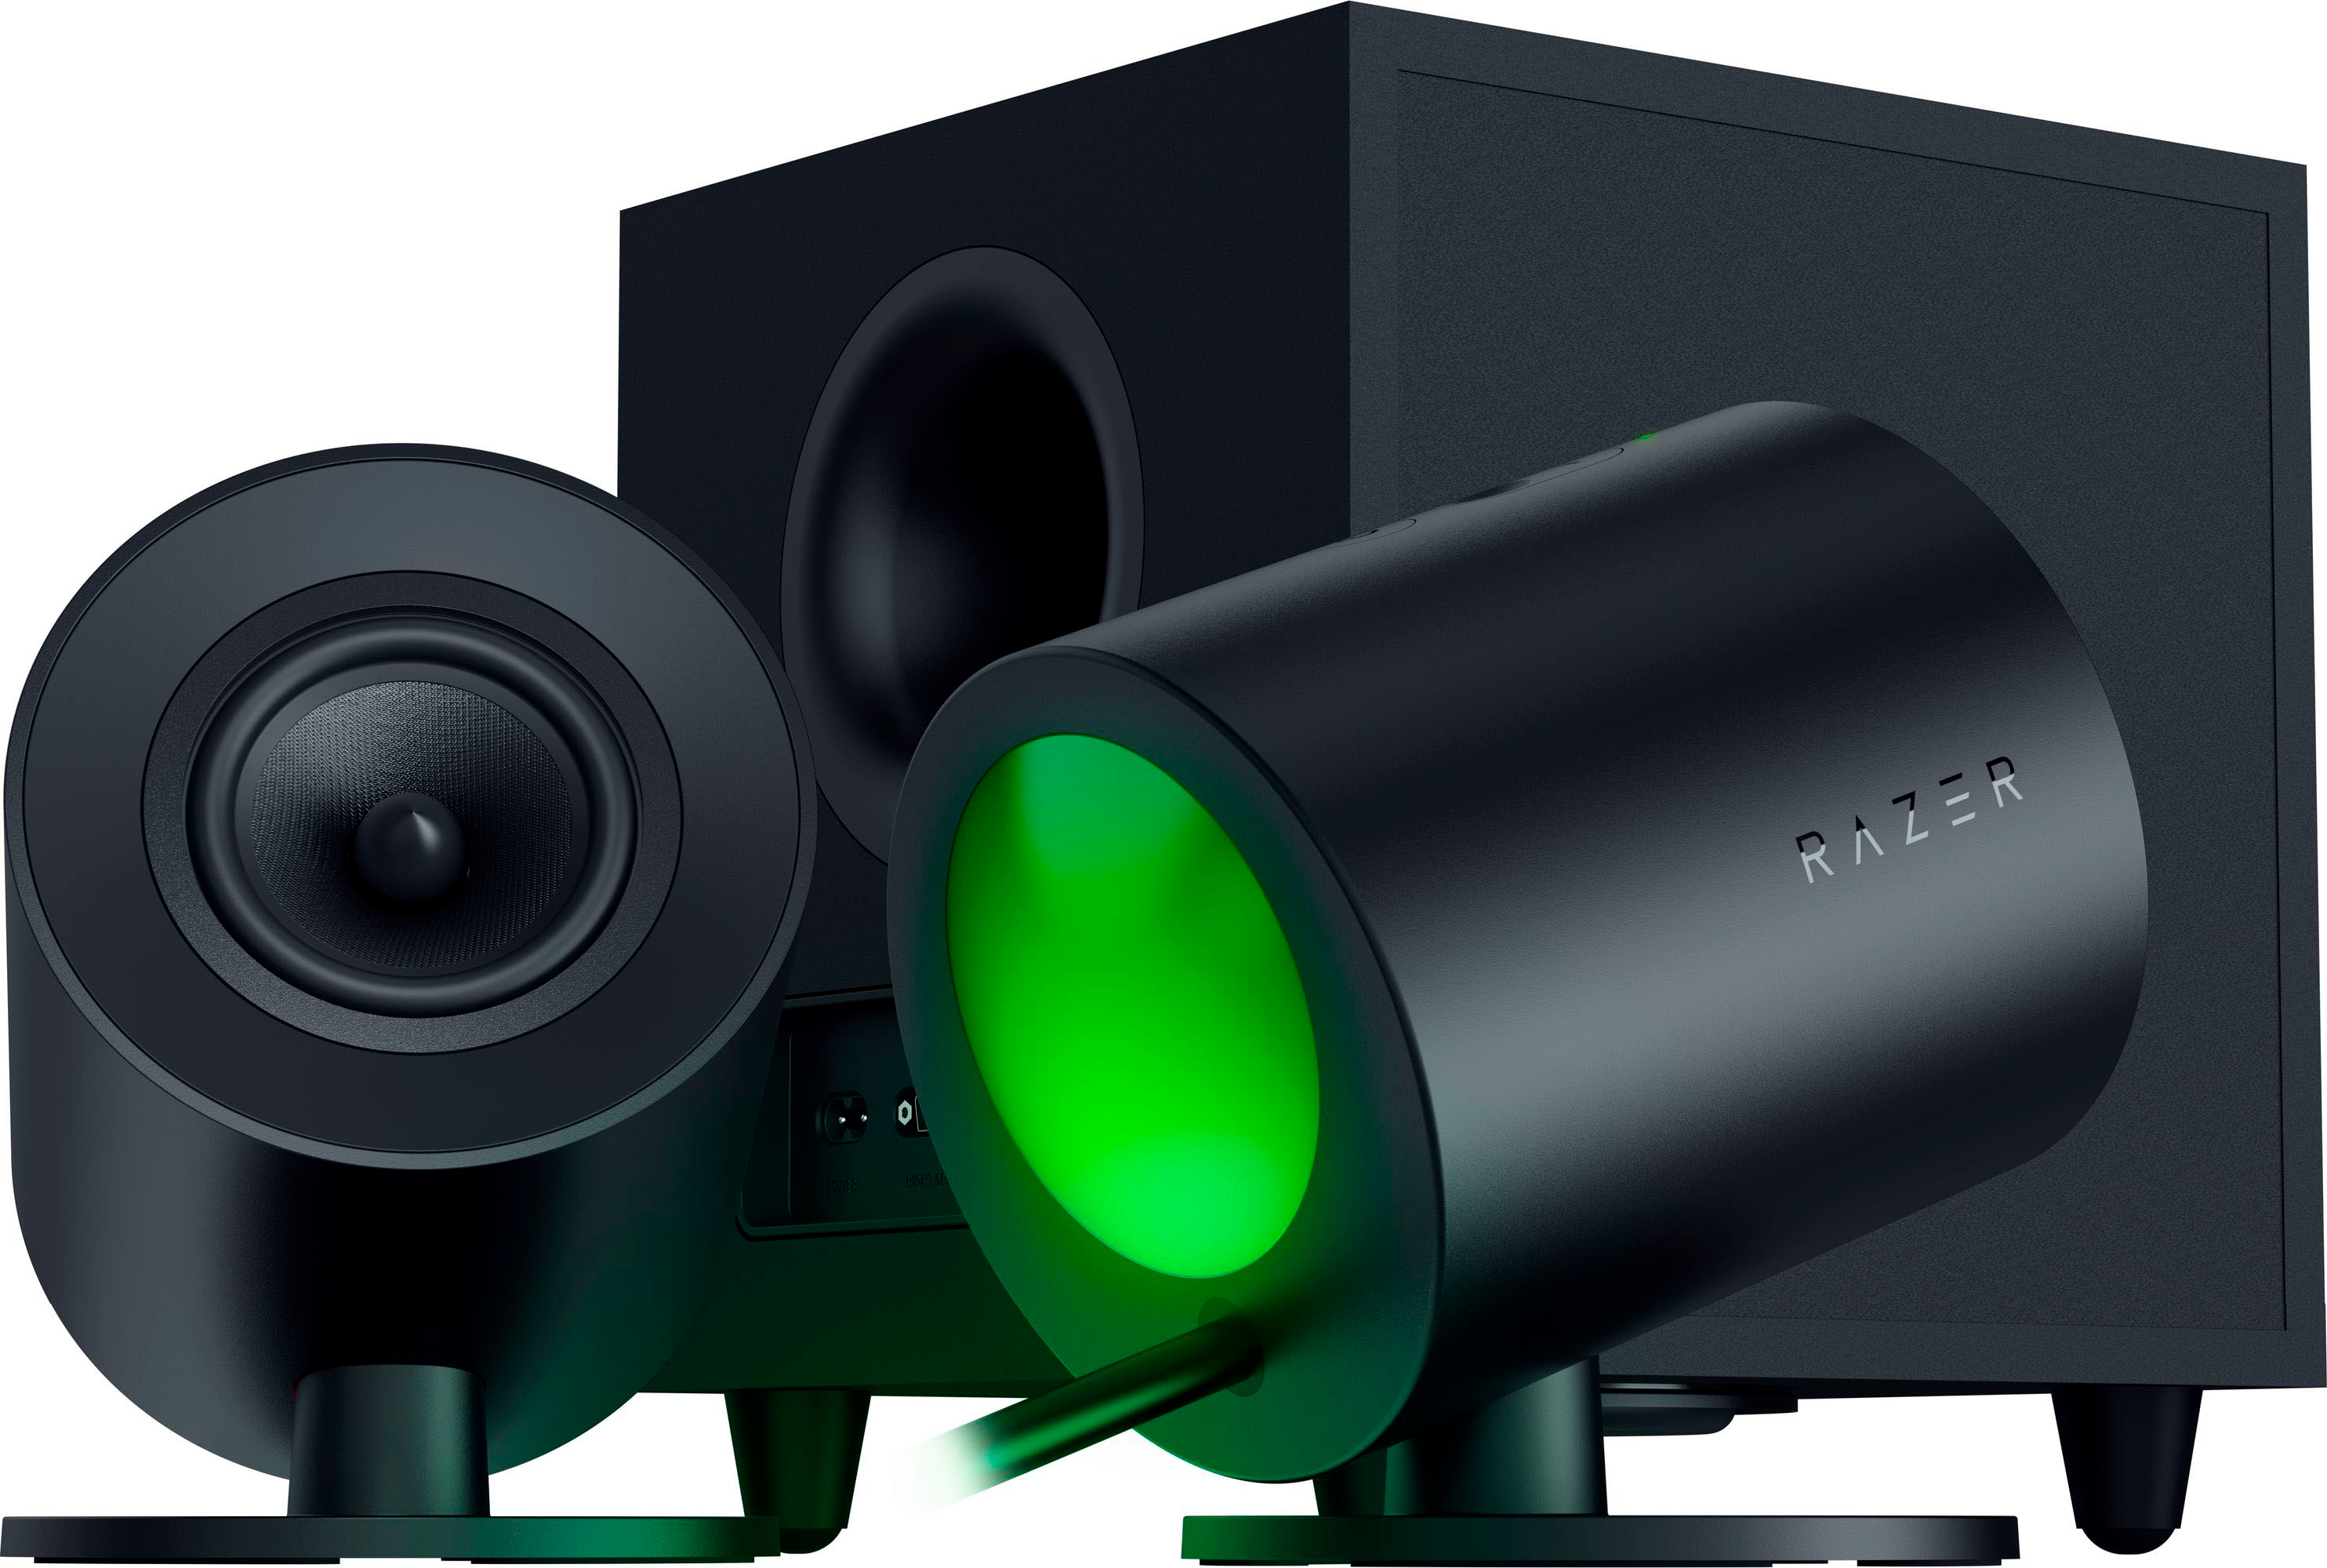 Left View: Razer - Nommo V2 Full-Range 2.1 PC Gaming Speakers with Wired Subwoofer (3 Piece) - Black